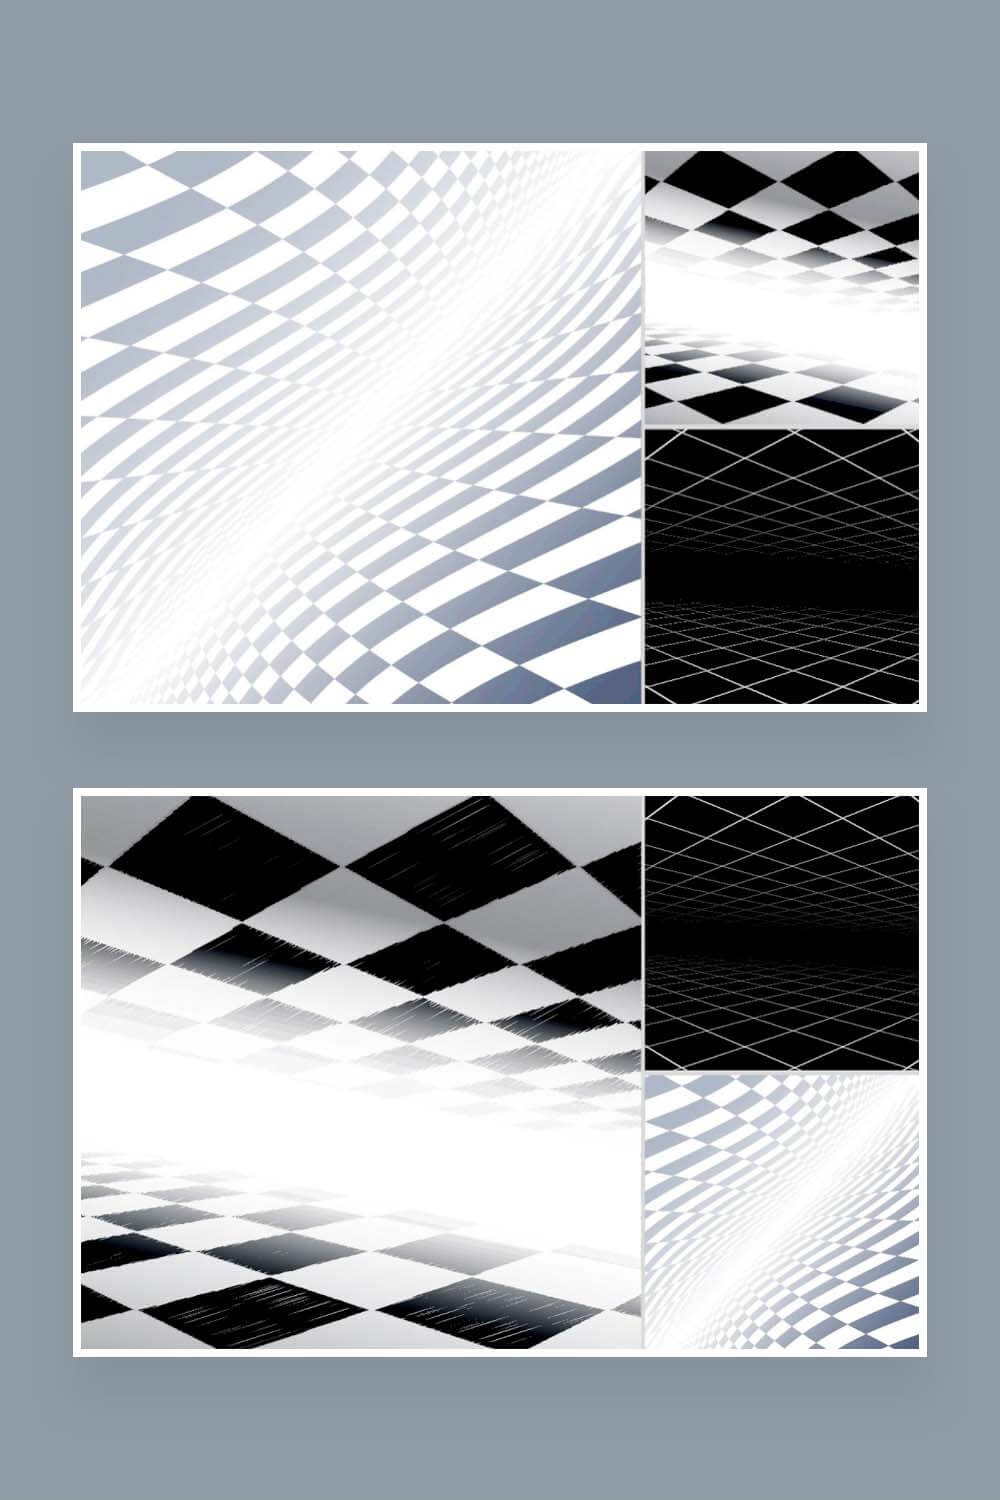 Abstract background with perspective, two pictures for Pinterest on a gray background.